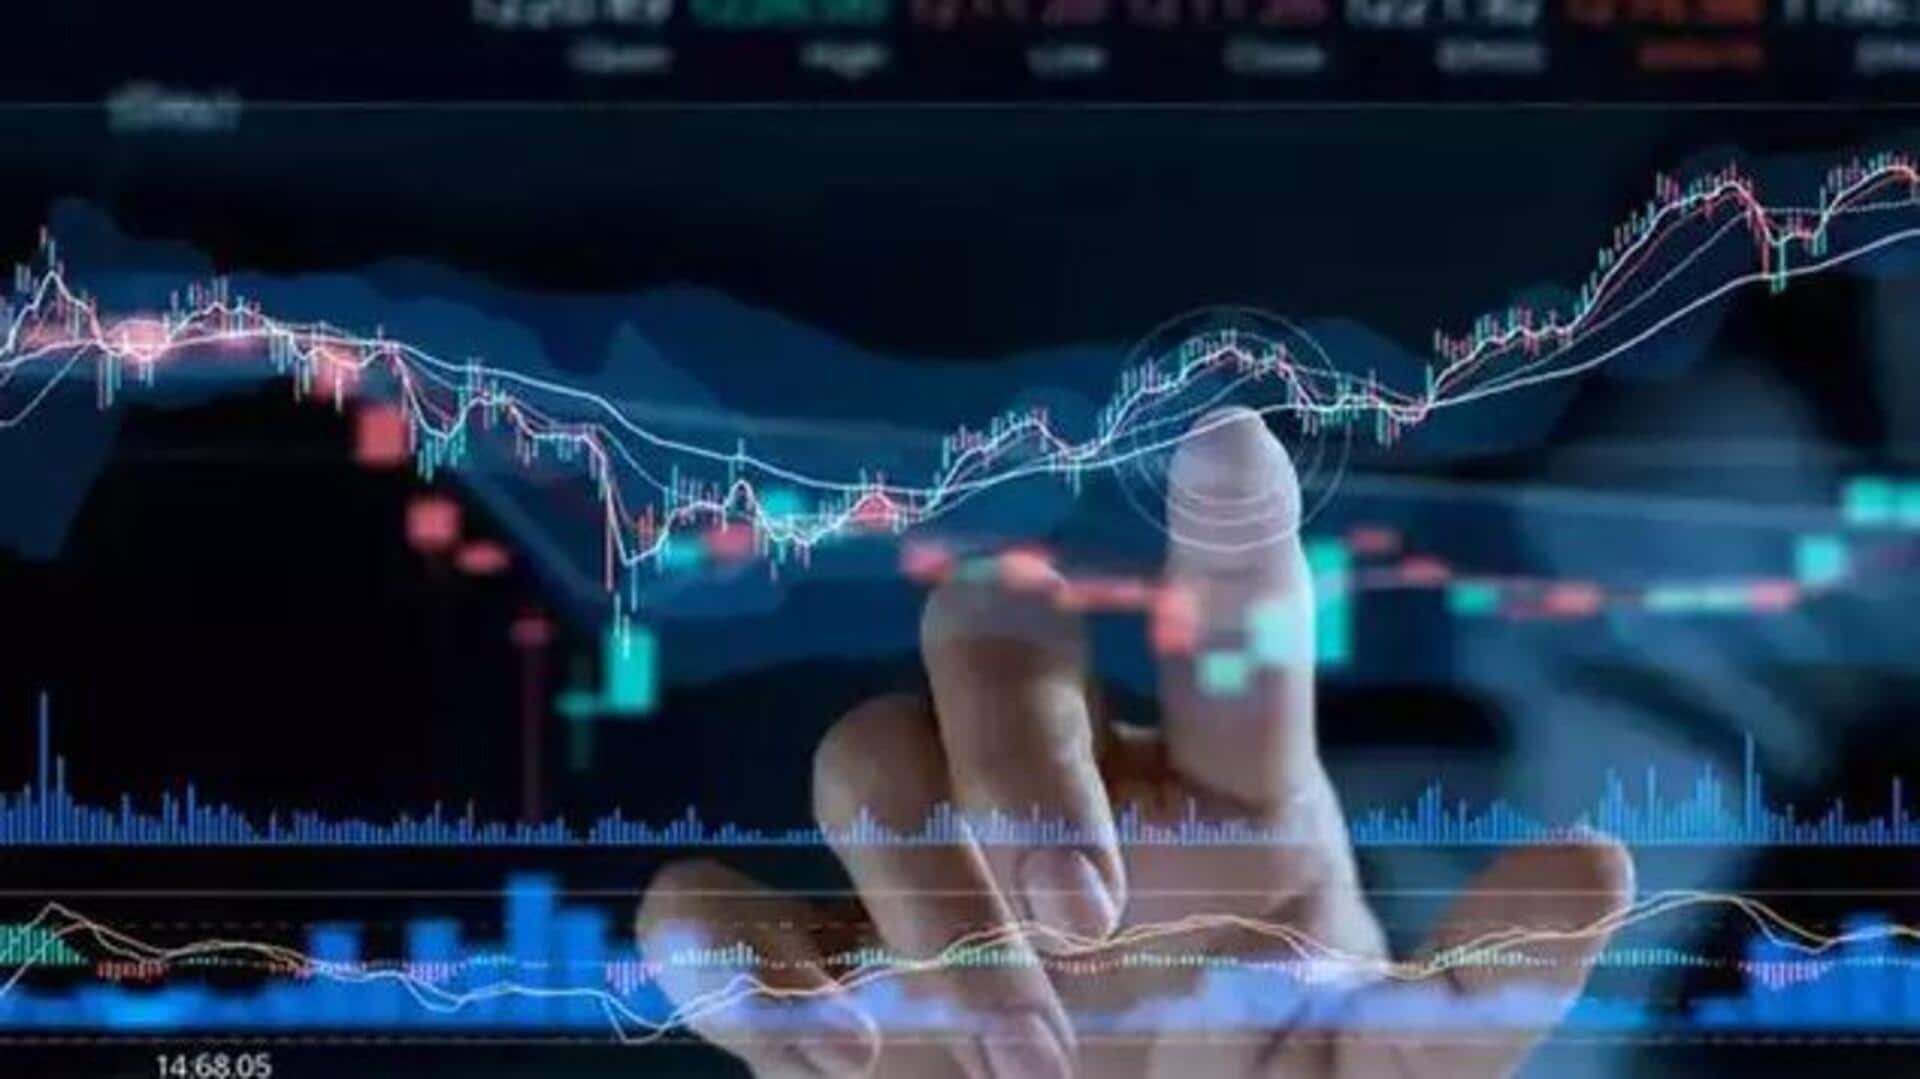 Nifty IT hits fresh 52-week high, up 27% since April